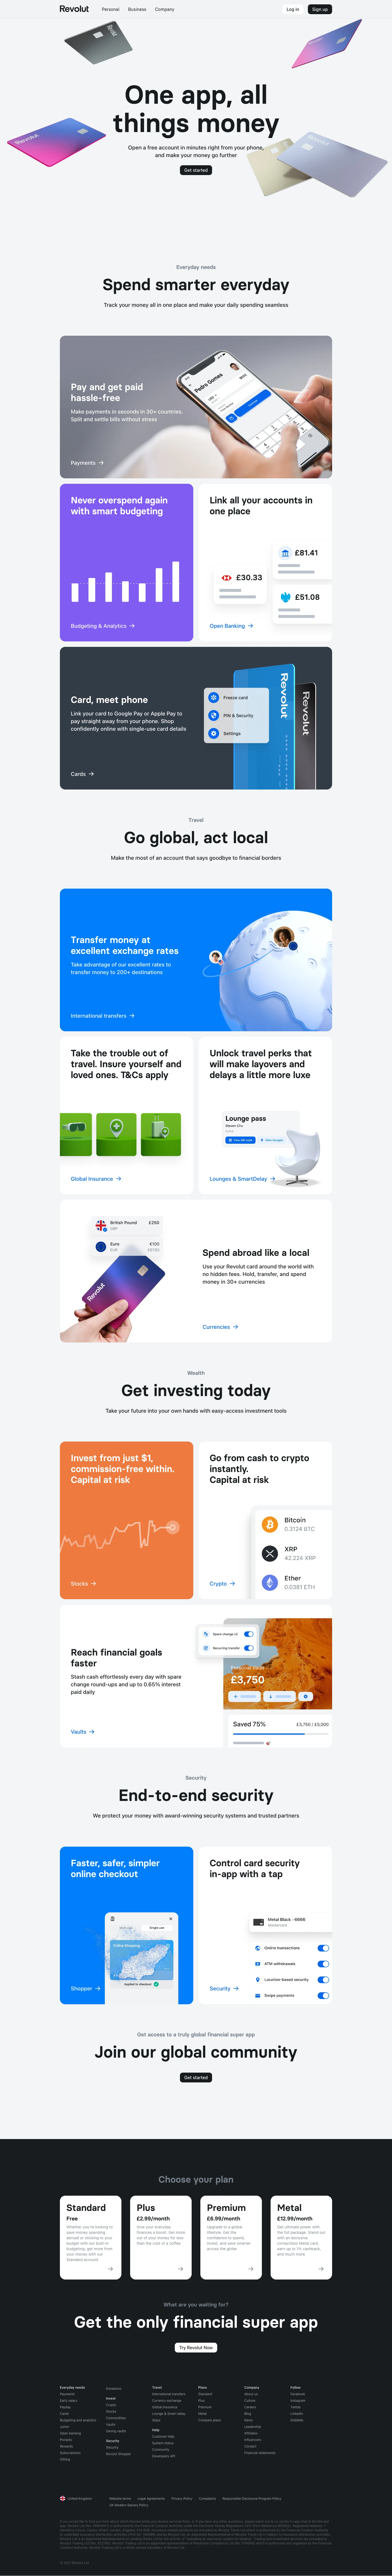 Revolut Landing Page Example: One app, all things money. Open a free account in minutes right from your phone, and make your money go further.